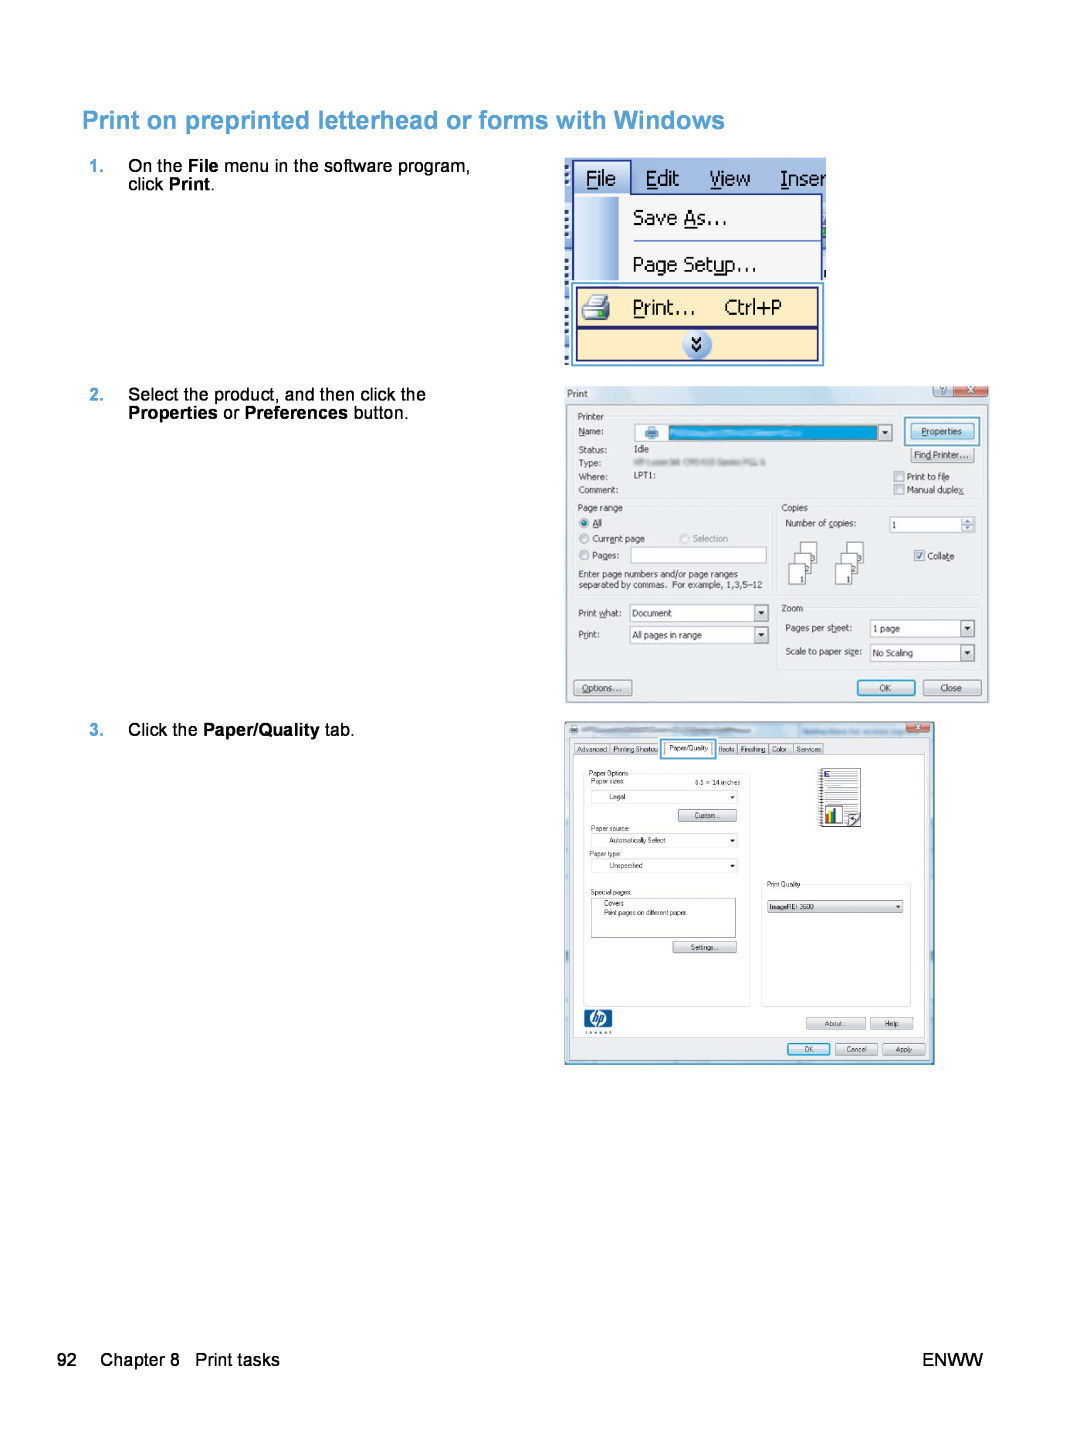 HP 100 COLOR MFP M175 Print on preprinted letterhead or forms with Windows, Click the Paper/Quality tab, Print tasks, Enww 